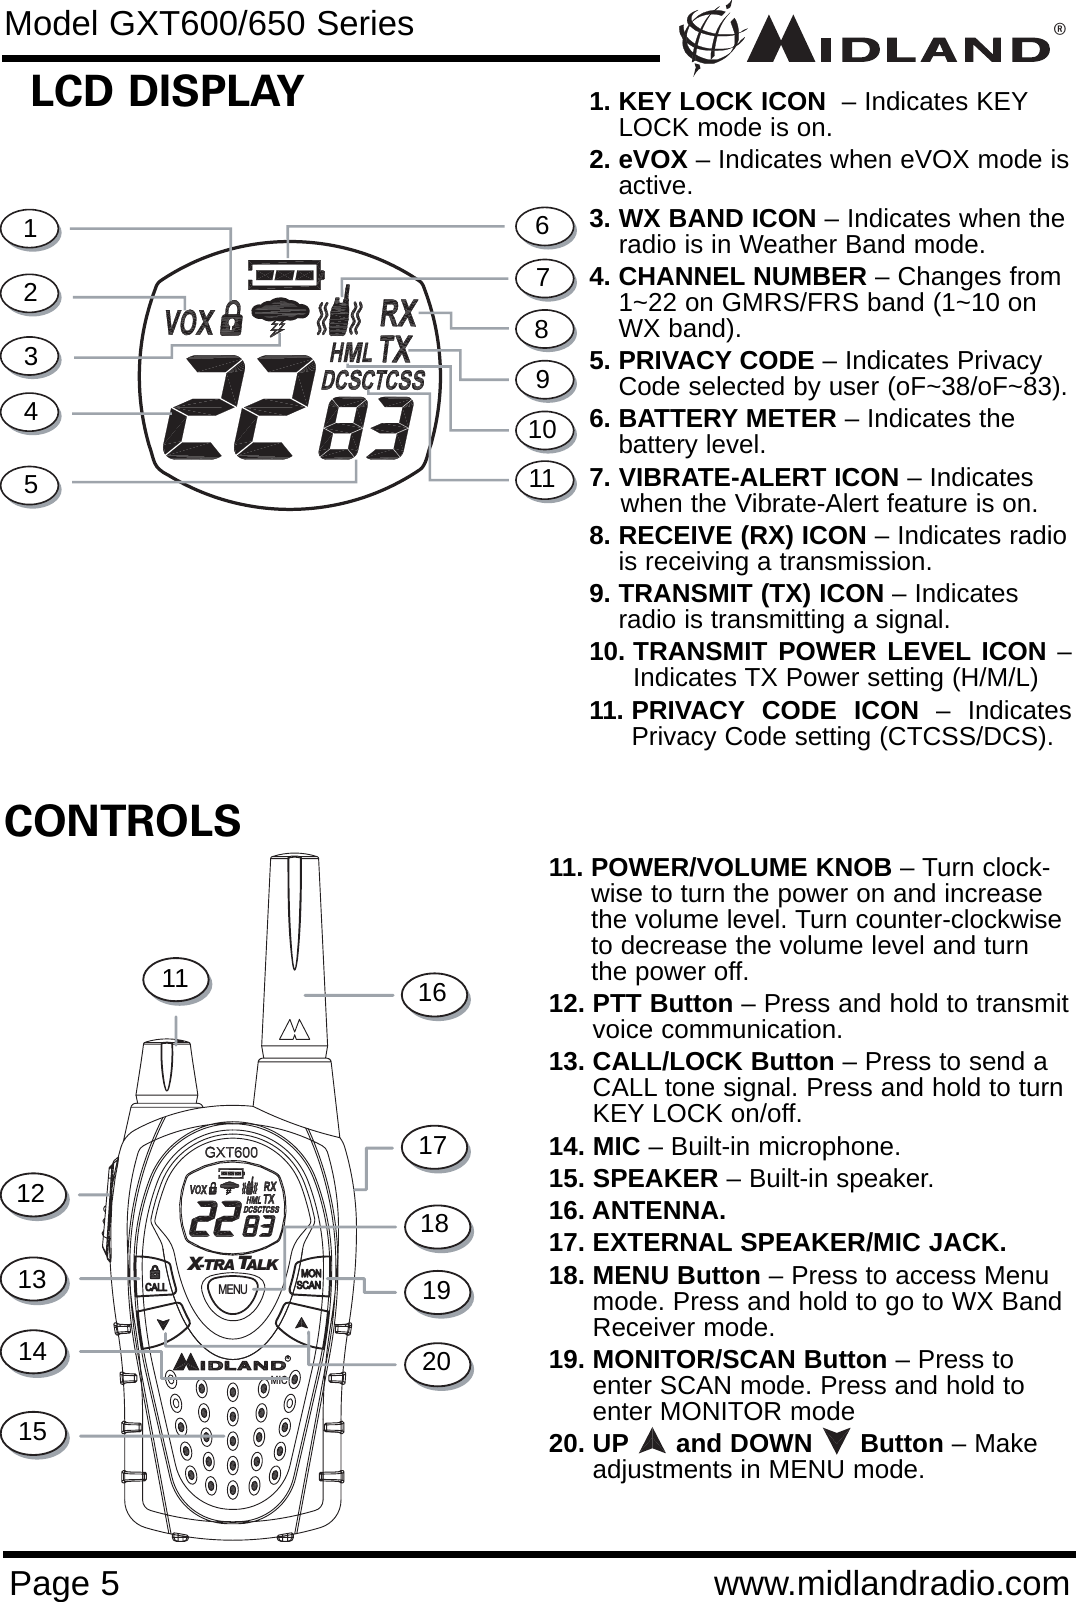 ®Page 5 www.midlandradio.comMICR-TRA   ALKXTMENUCONTROLSLCD DISPLAY 1. KEY LOCK ICON  – Indicates KEYLOCK mode is on.2. eVOX – Indicates when eVOX mode isactive.3. WX BAND ICON – Indicates when theradio is in Weather Band mode.4. CHANNEL NUMBER – Changes from1~22 on GMRS/FRS band (1~10 onWX band).5. PRIVACY CODE – Indicates PrivacyCode selected by user (oF~38/oF~83).6. BATTERY METER – Indicates thebattery level.7. VIBRATE-ALERT ICON – Indicates when the Vibrate-Alert feature is on.  8. RECEIVE (RX) ICON – Indicates radiois receiving a transmission. 9. TRANSMIT (TX) ICON – Indicatesradio is transmitting a signal.10. TRANSMIT POWER LEVEL ICON –Indicates TX Power setting (H/M/L)11. PRIVACY CODE ICON – IndicatesPrivacy Code setting (CTCSS/DCS).11. POWER/VOLUME KNOB – Turn clock-wise to turn the power on and increasethe volume level. Turn counter-clockwiseto decrease the volume level and turnthe power off.12. PTT Button – Press and hold to transmitvoice communication. 13. CALL/LOCK Button – Press to send aCALL tone signal. Press and hold to turnKEY LOCK on/off.14. MIC – Built-in microphone.15. SPEAKER – Built-in speaker.16. ANTENNA.17. EXTERNAL SPEAKER/MIC JACK.18. MENU Button – Press to access Menumode. Press and hold to go to WX BandReceiver mode.19. MONITOR/SCAN Button – Press toenter SCAN mode. Press and hold toenter MONITOR mode20. UP and DOWN      Button – Makeadjustments in MENU mode.1234567891011121314152019181716Model GXT600/650 Series11